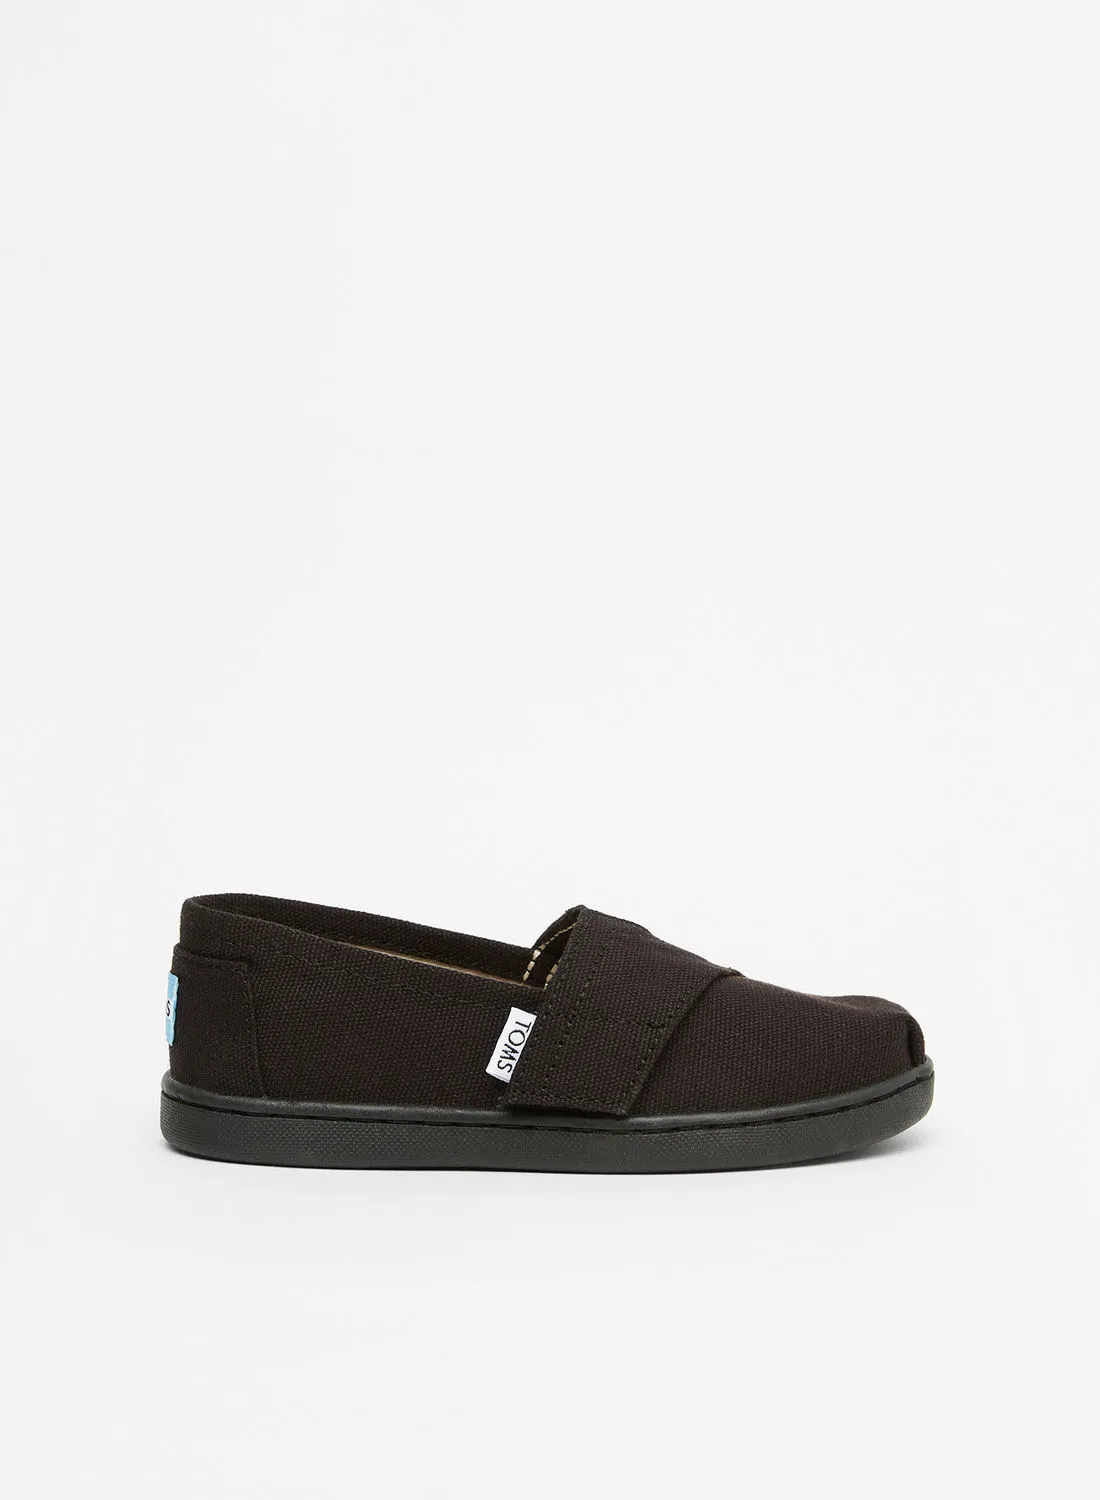 TOMS Baby/Kids Classic Slip-On Shoes